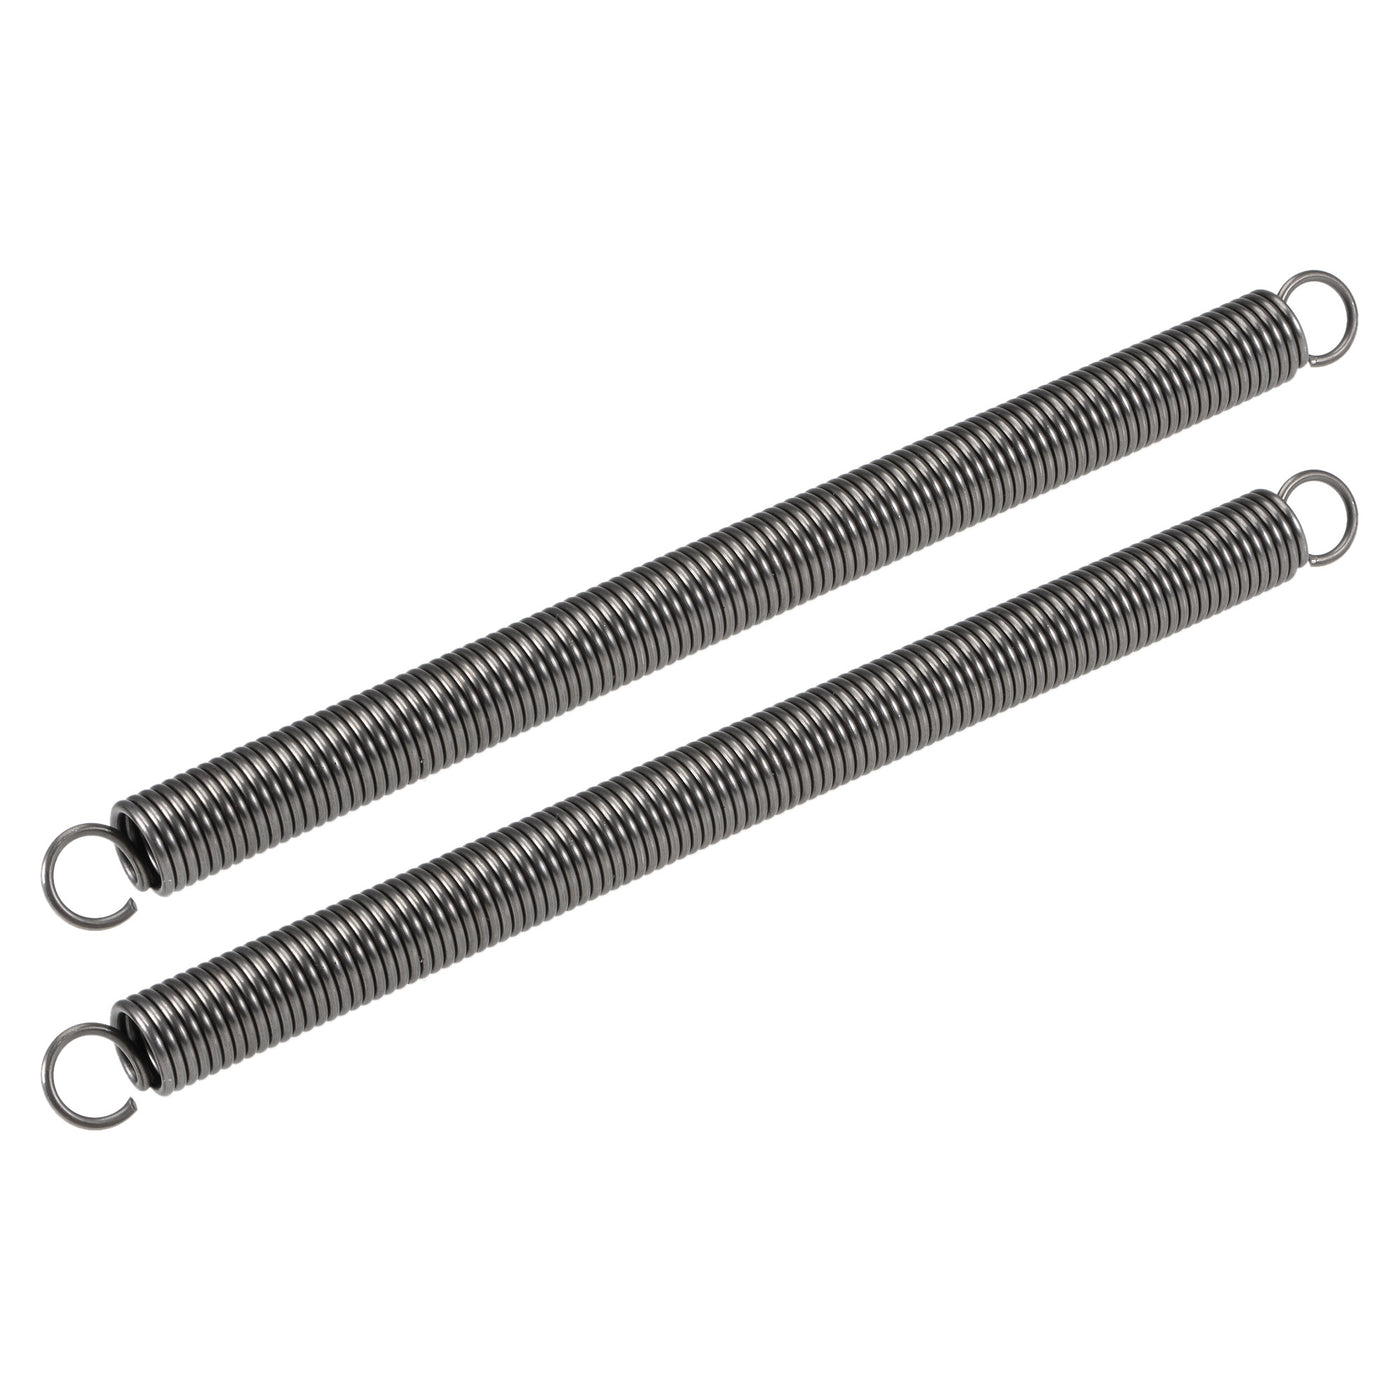 Uxcell Uxcell 2mmx16mmx280mm Extended Compression Spring ,33Lbs Load Capacity,Grey 2pcs